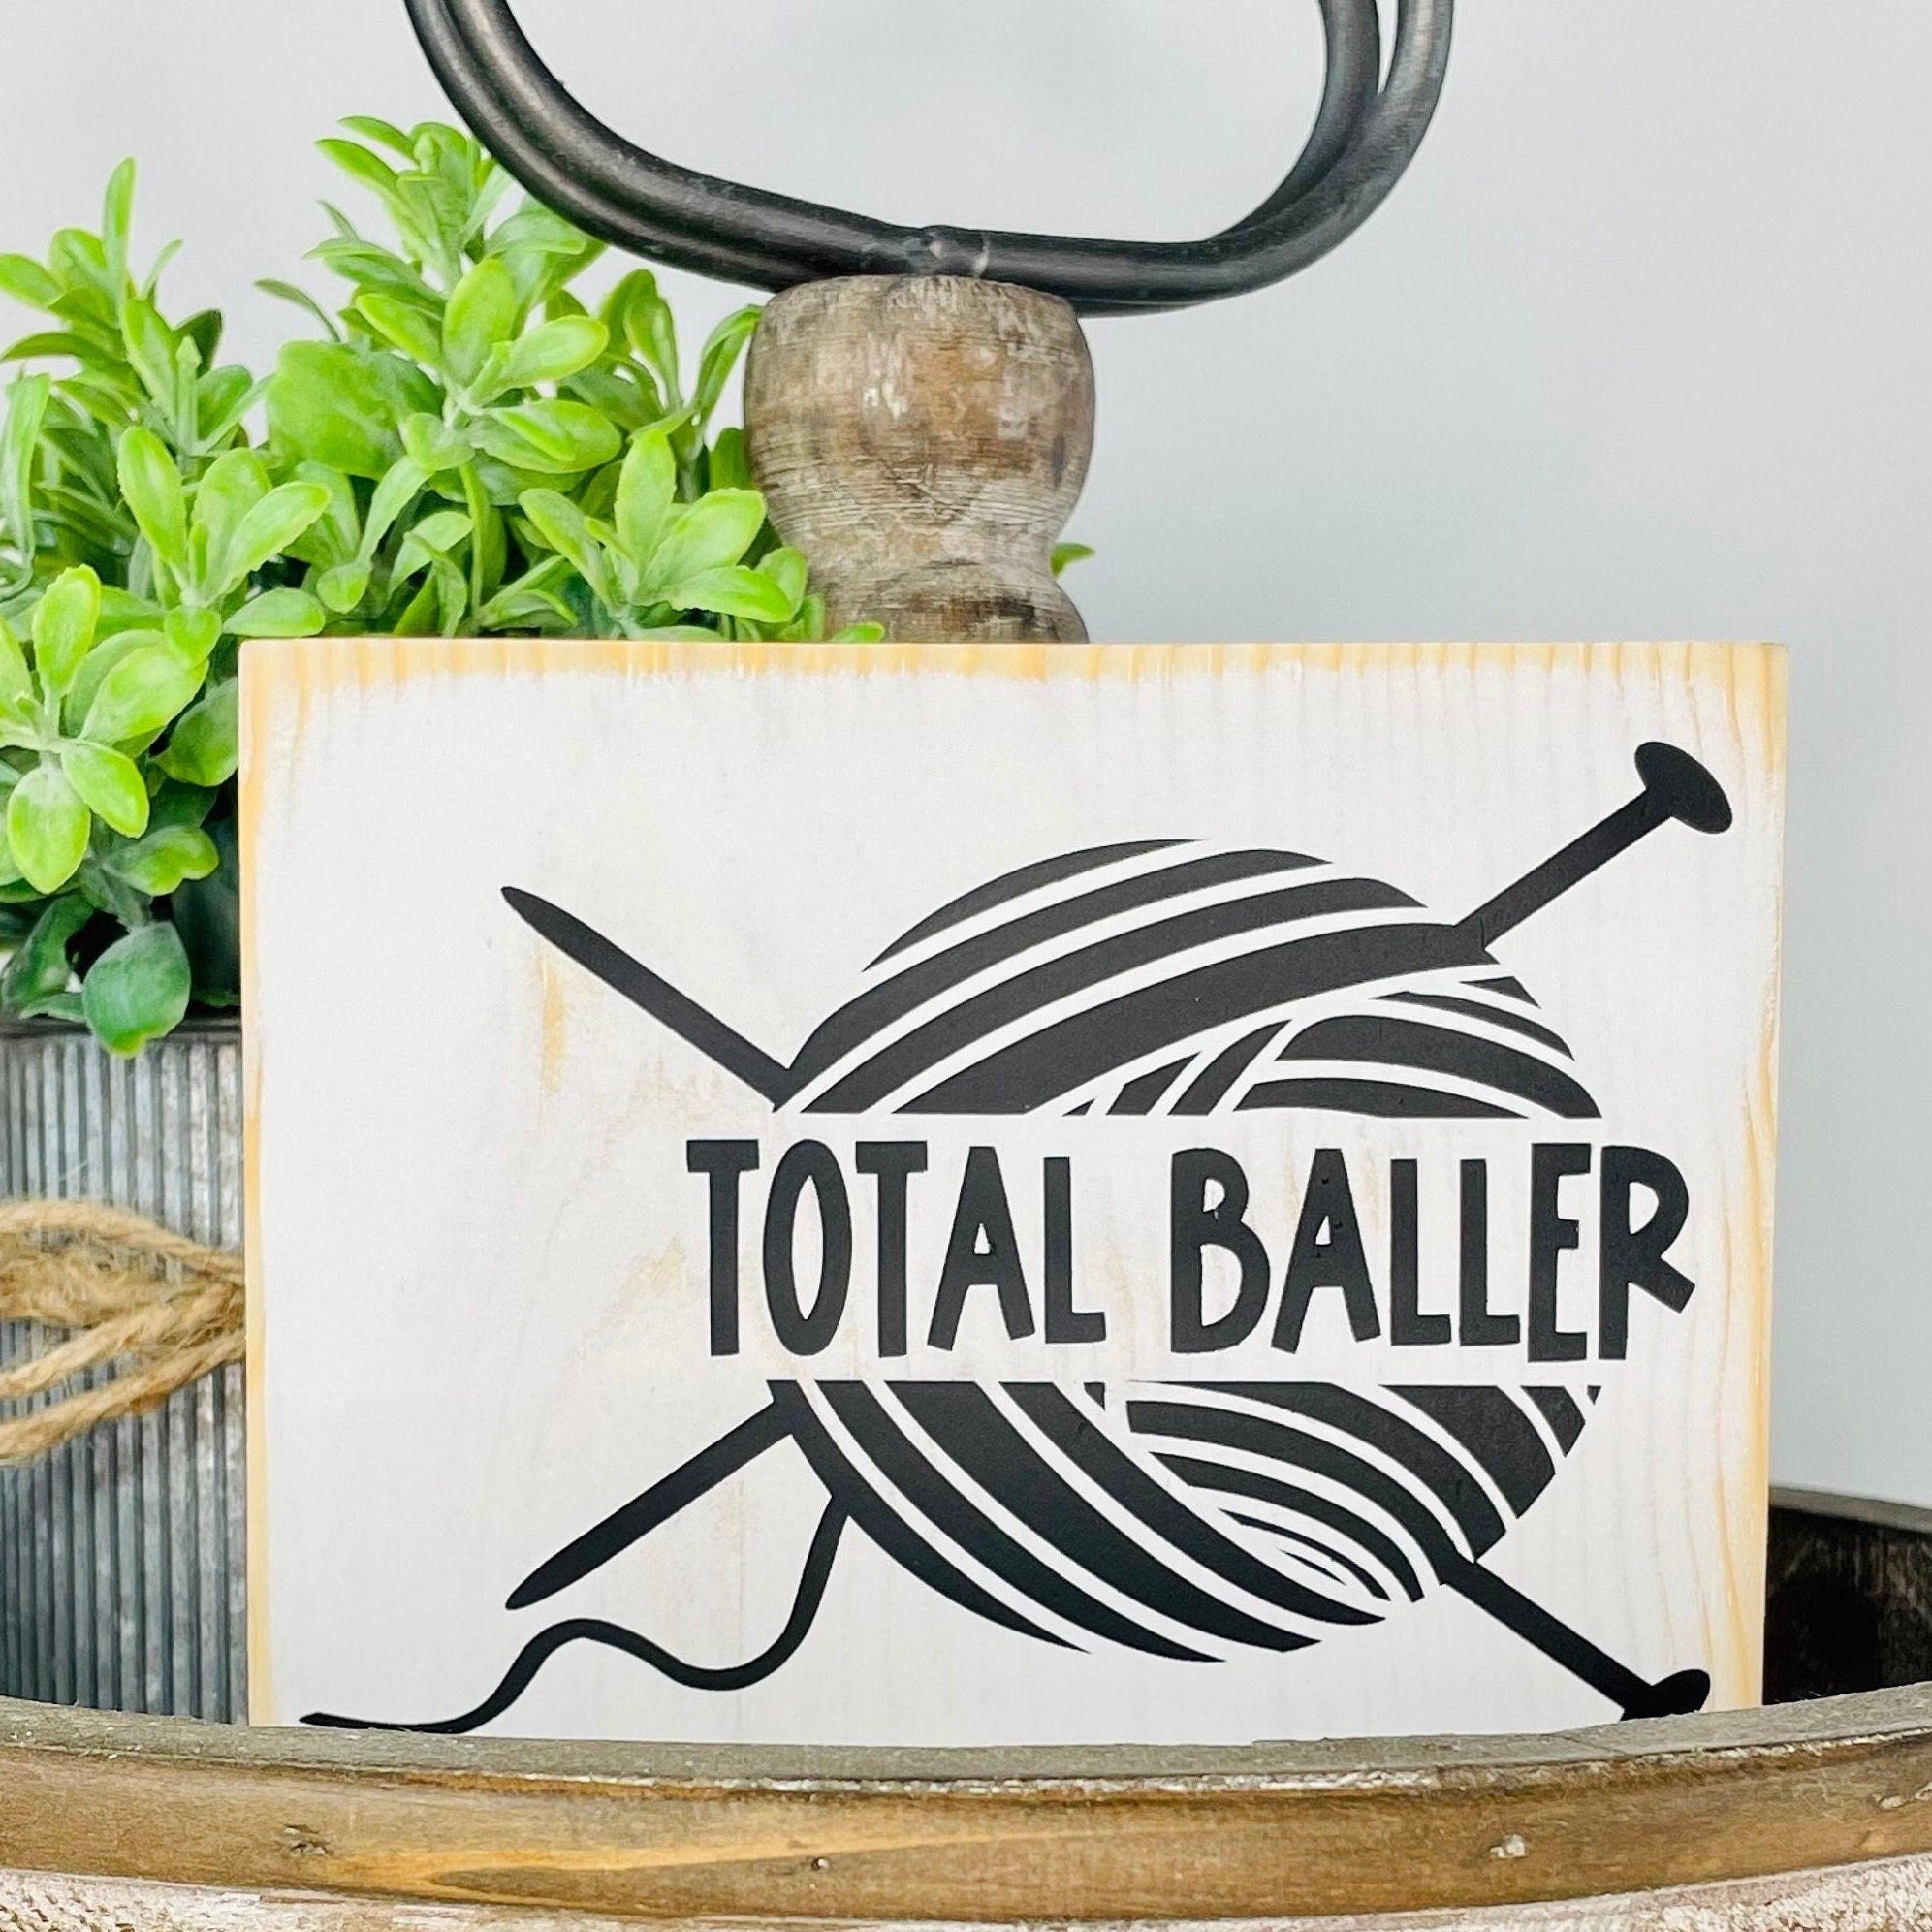 small rectangular wood sign painted white with an image of a ball of yarn with two knitting needles inserted into it making an X shape. The words "TOTAL BALLER" are written over the ball of yarn. The image and the text are in black.